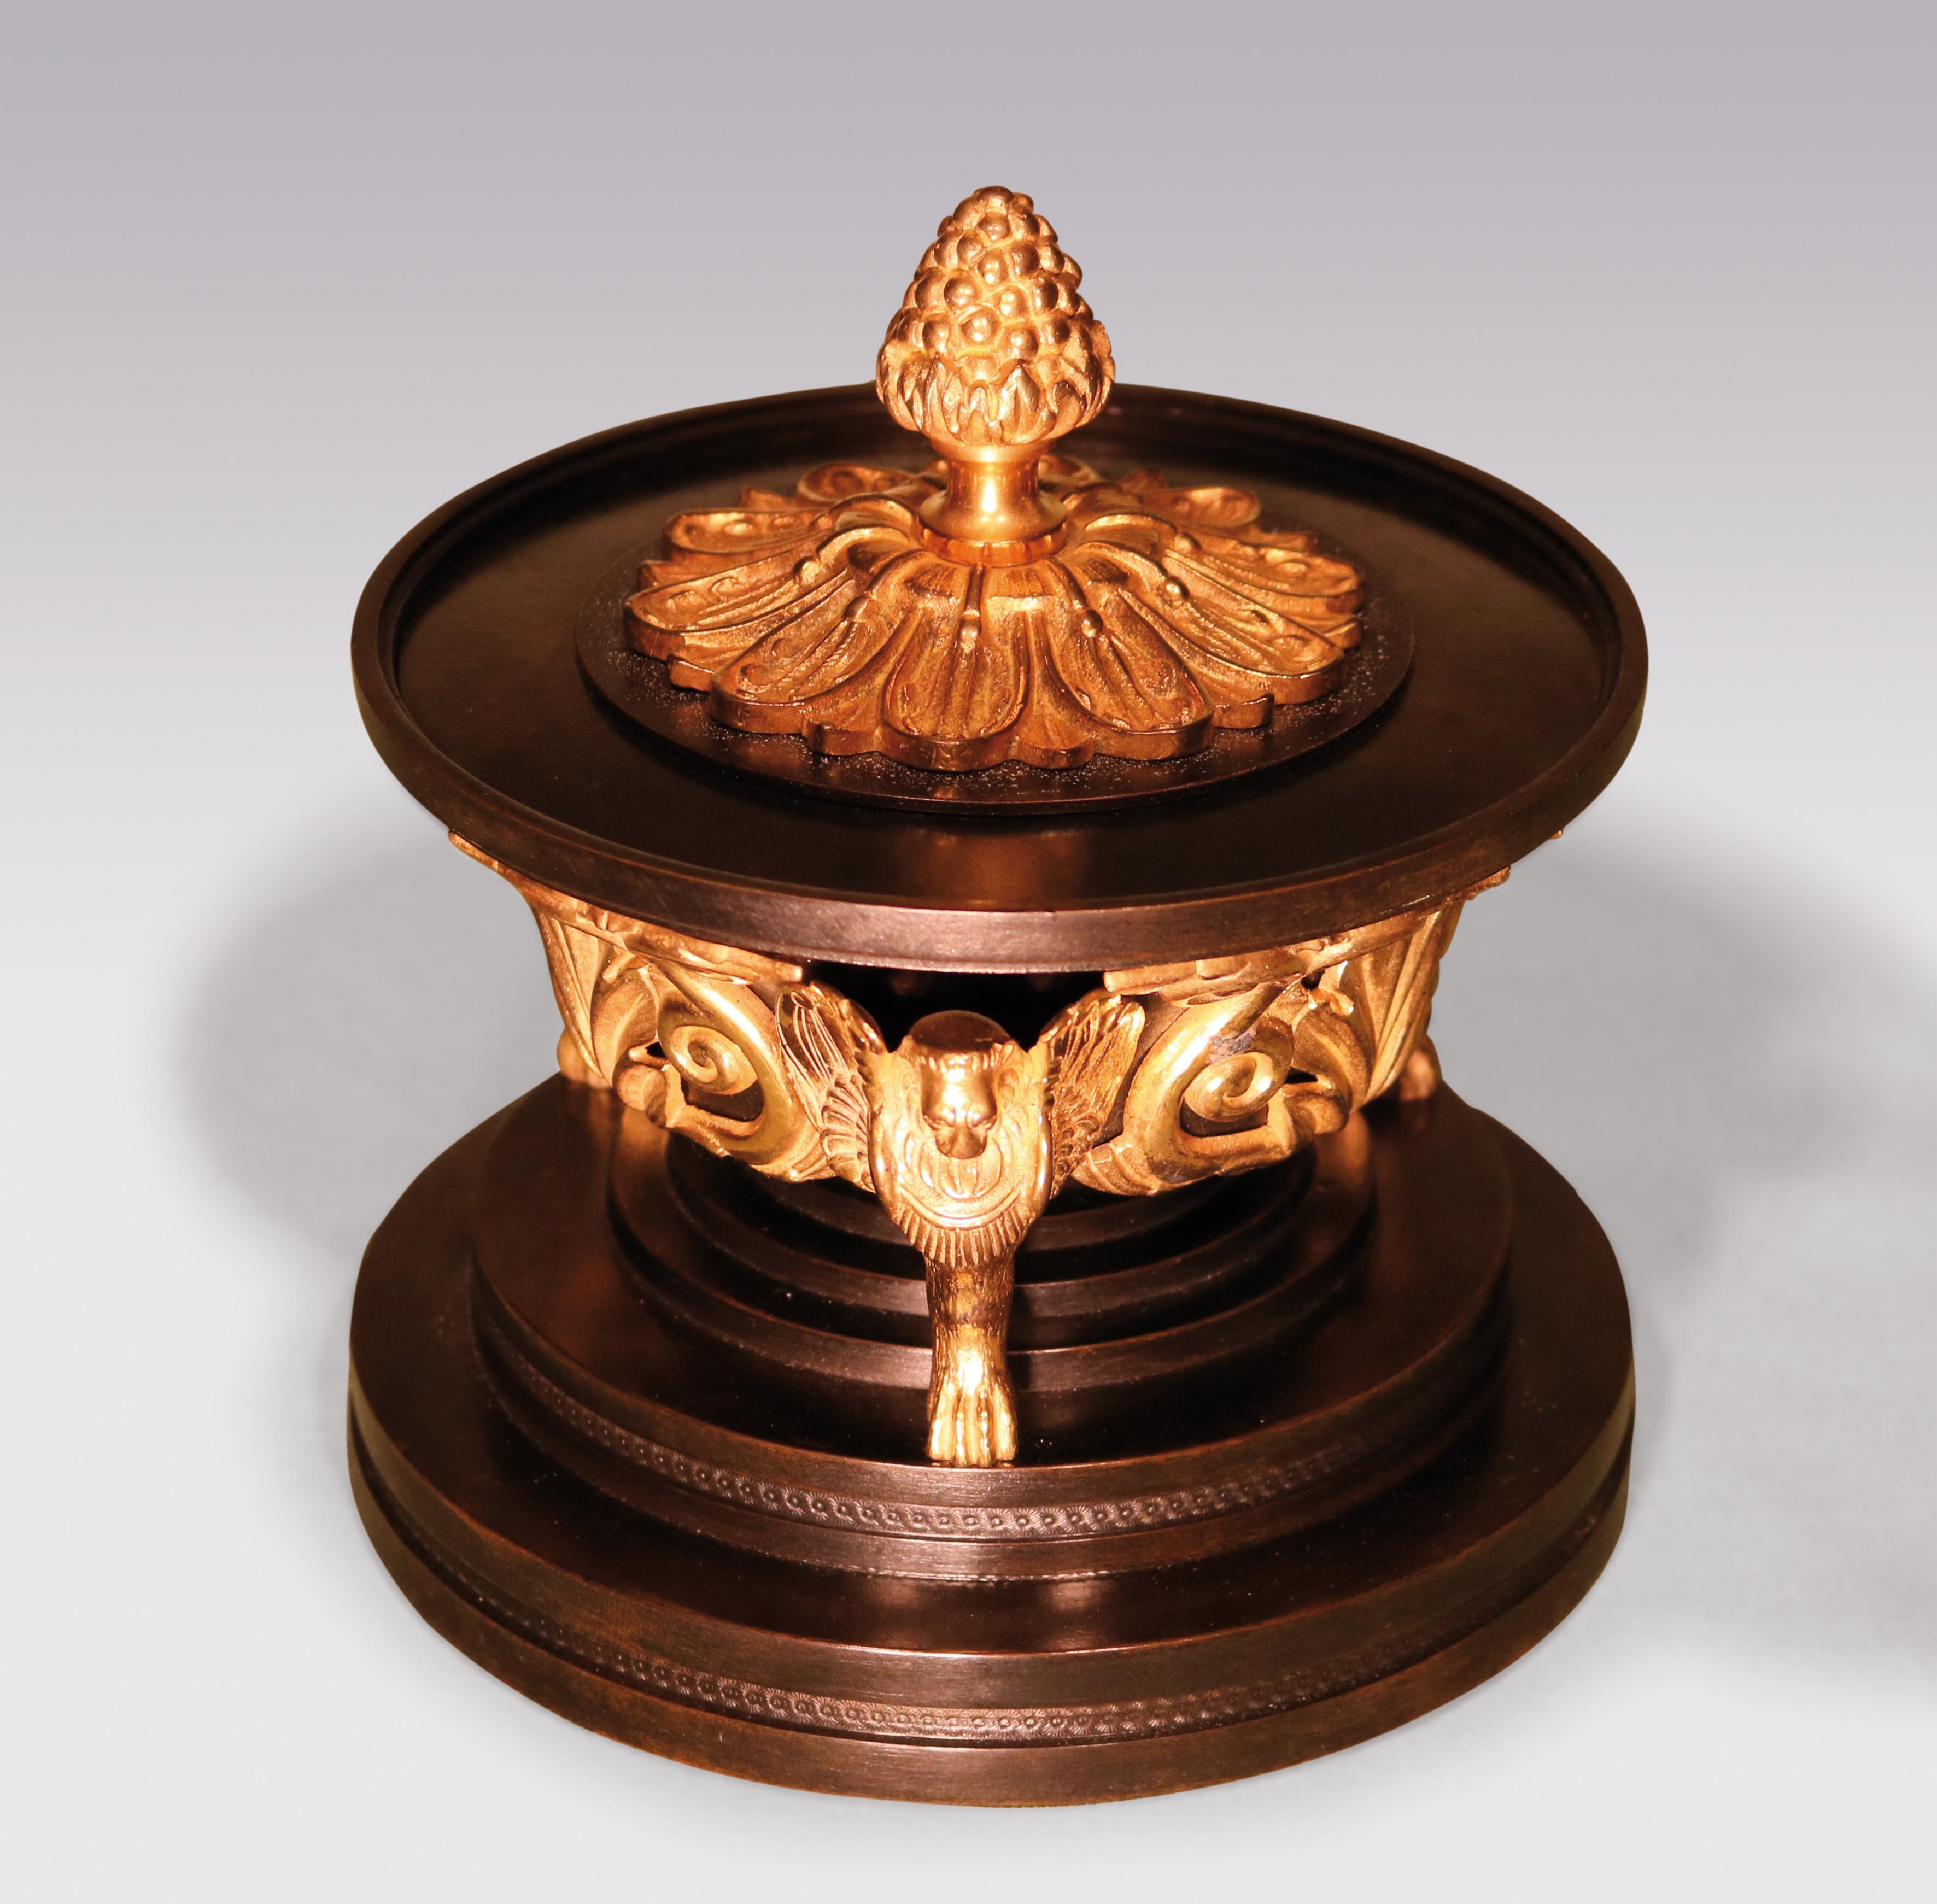 An unusual early 19th Century Regency period bronze & ormolu Tazza, having cover with pineapple finial, mounted with leaf & scroll decoration supported on winged lion monopodia ending on multi-stepped engine turned circular plinth base.